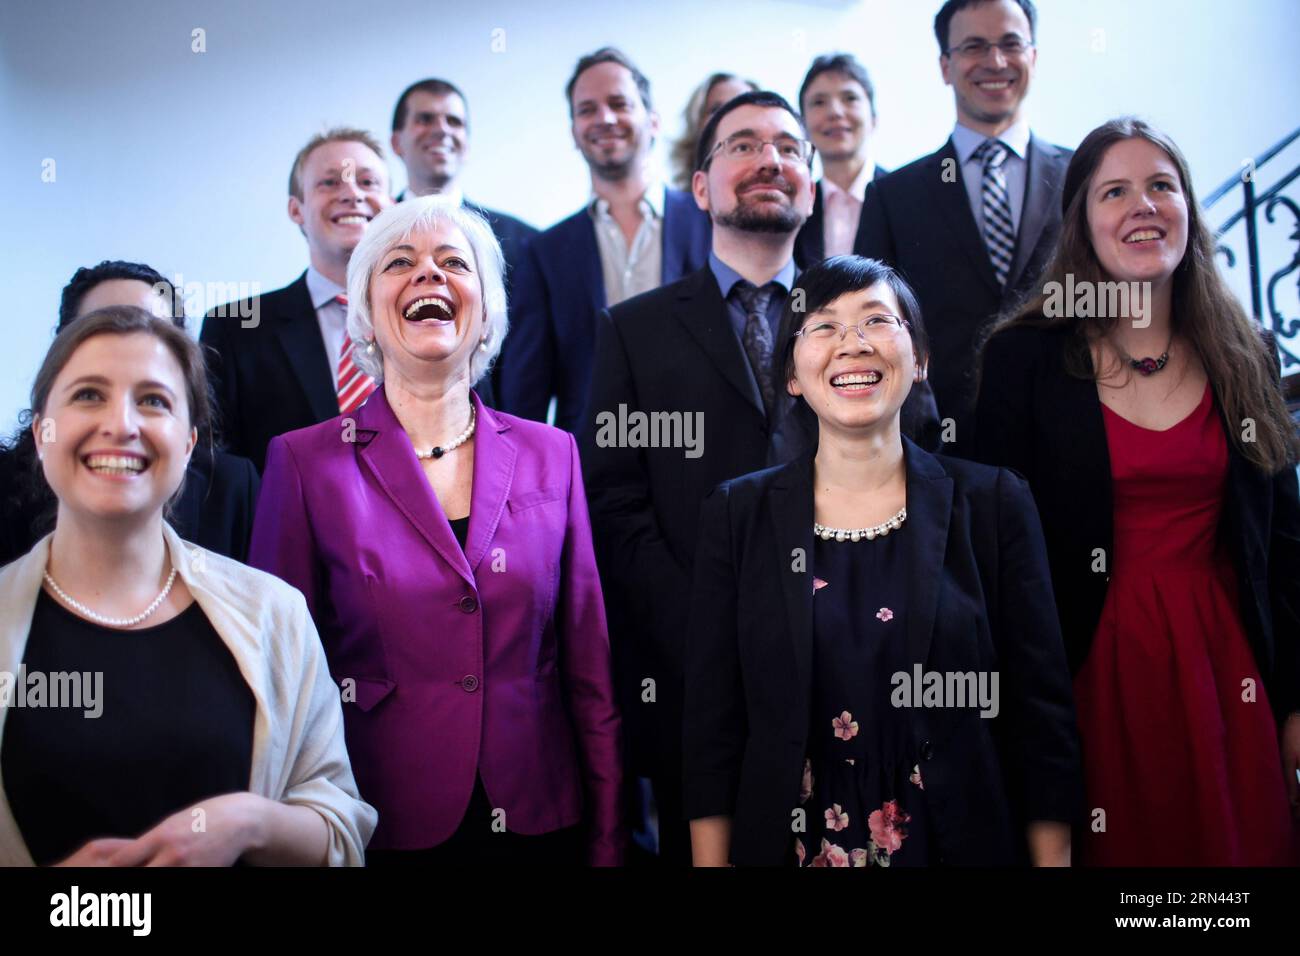 (150505) -- BERLIN, May 5, 2015 -- Dr. Zhu Xiaoxiang (3rd L, front) and other recipients pose for photos prior to the award ceremony of 2015 Heinz Maier-Leibnitz Prize in Berlin, Germany, on May 5, 2015. The Heinz Maier-Leibnitz Prize, distributed by German Research Foundation (DFG) and German Federal Ministry of Education and Research (BMBF), was awarded annually to outstanding early career researchers since 1977 as both recognition and an incentive to continue pursuing a path of academic and scientific excellence. ) GERMANY-BERLIN-SCIENCE-CHINA-PRIZE ZhangxFan PUBLICATIONxNOTxINxCHN   Berlin Stock Photo